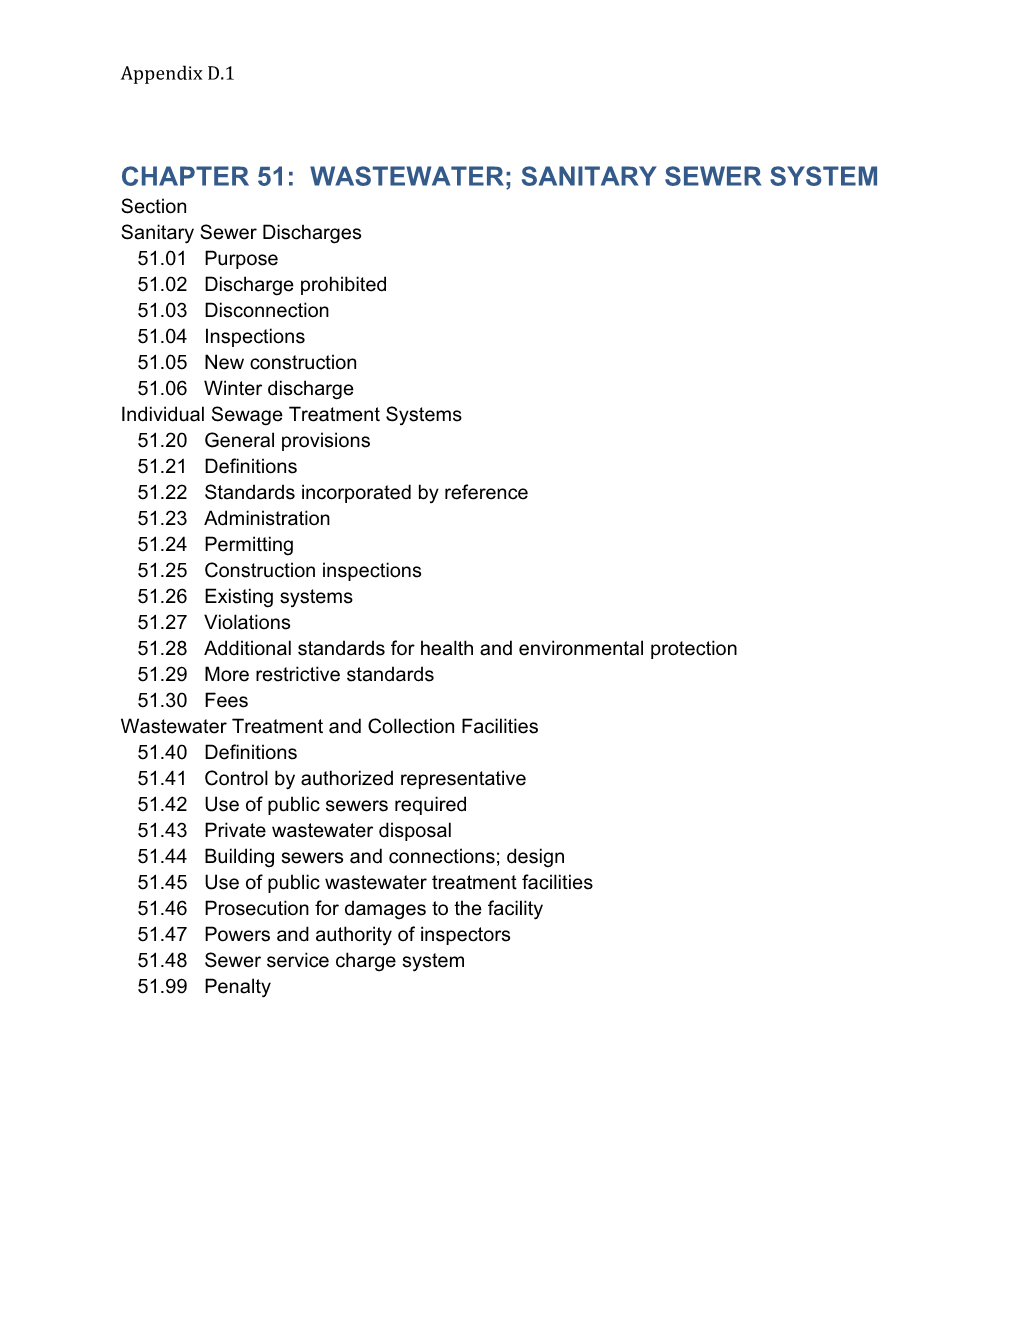 Wastewater; Sanitary Sewer System